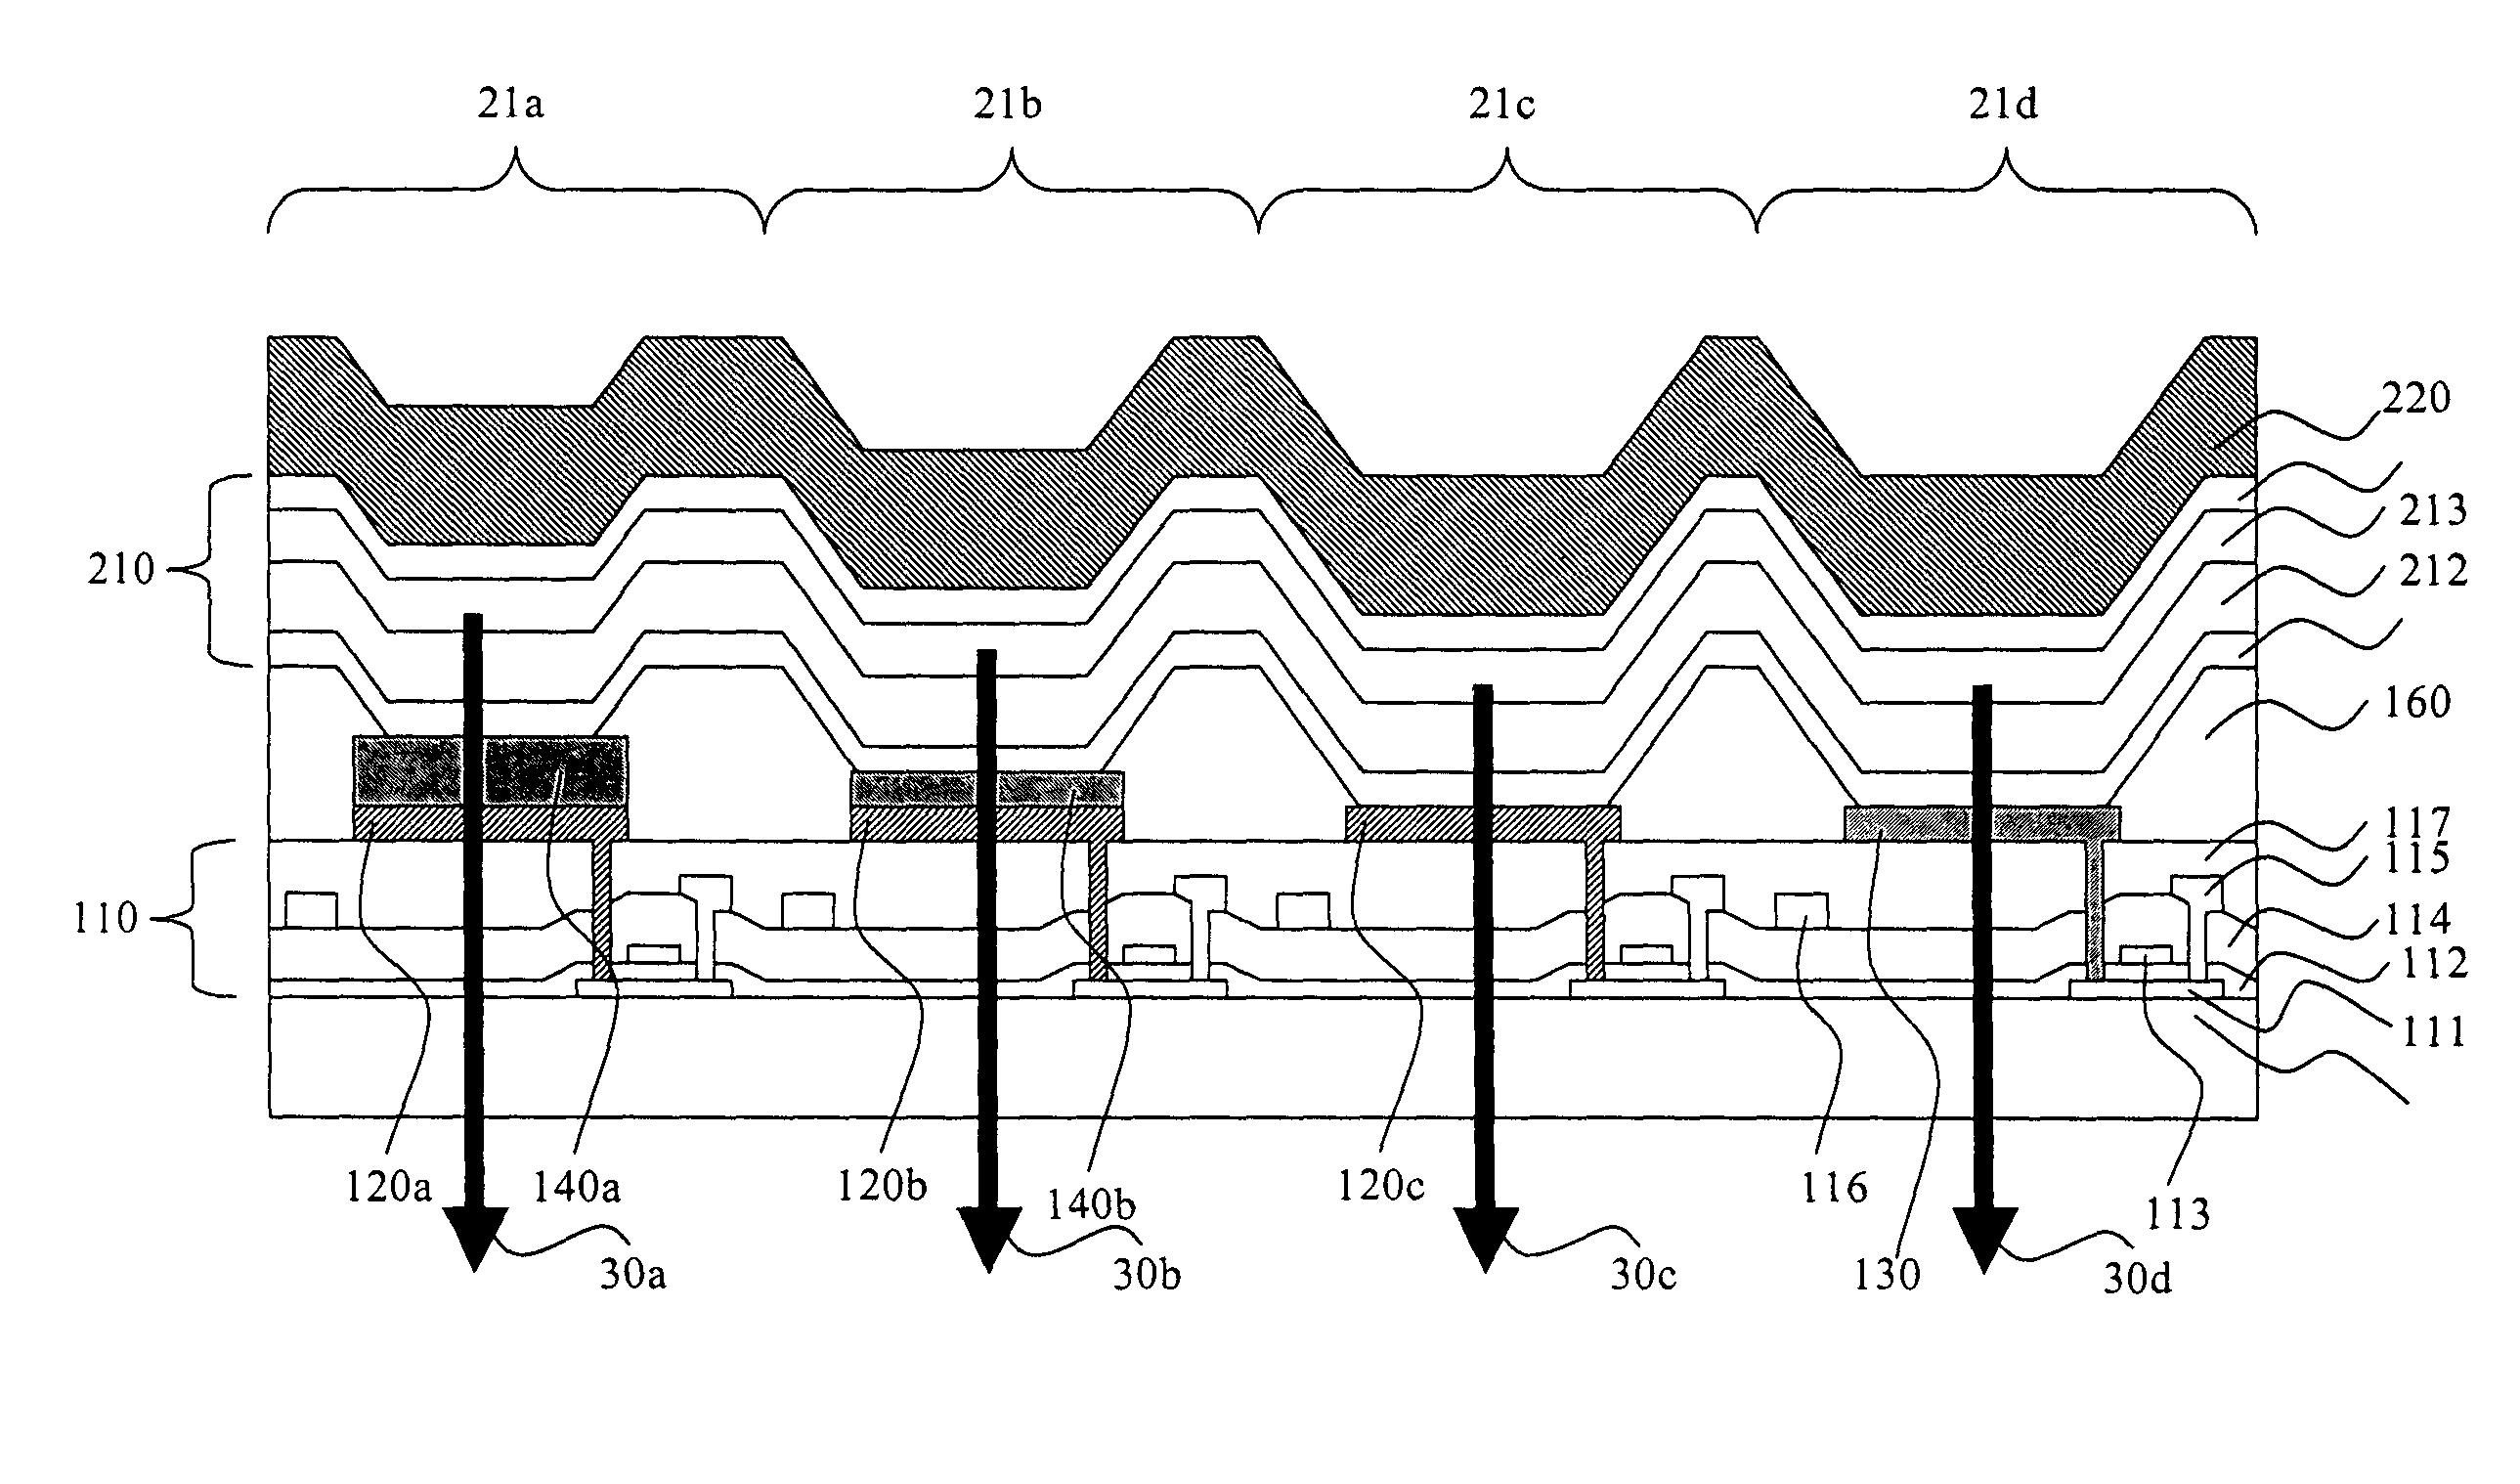 OLED device having microcavity gamut subpixels and a within gamut subpixel